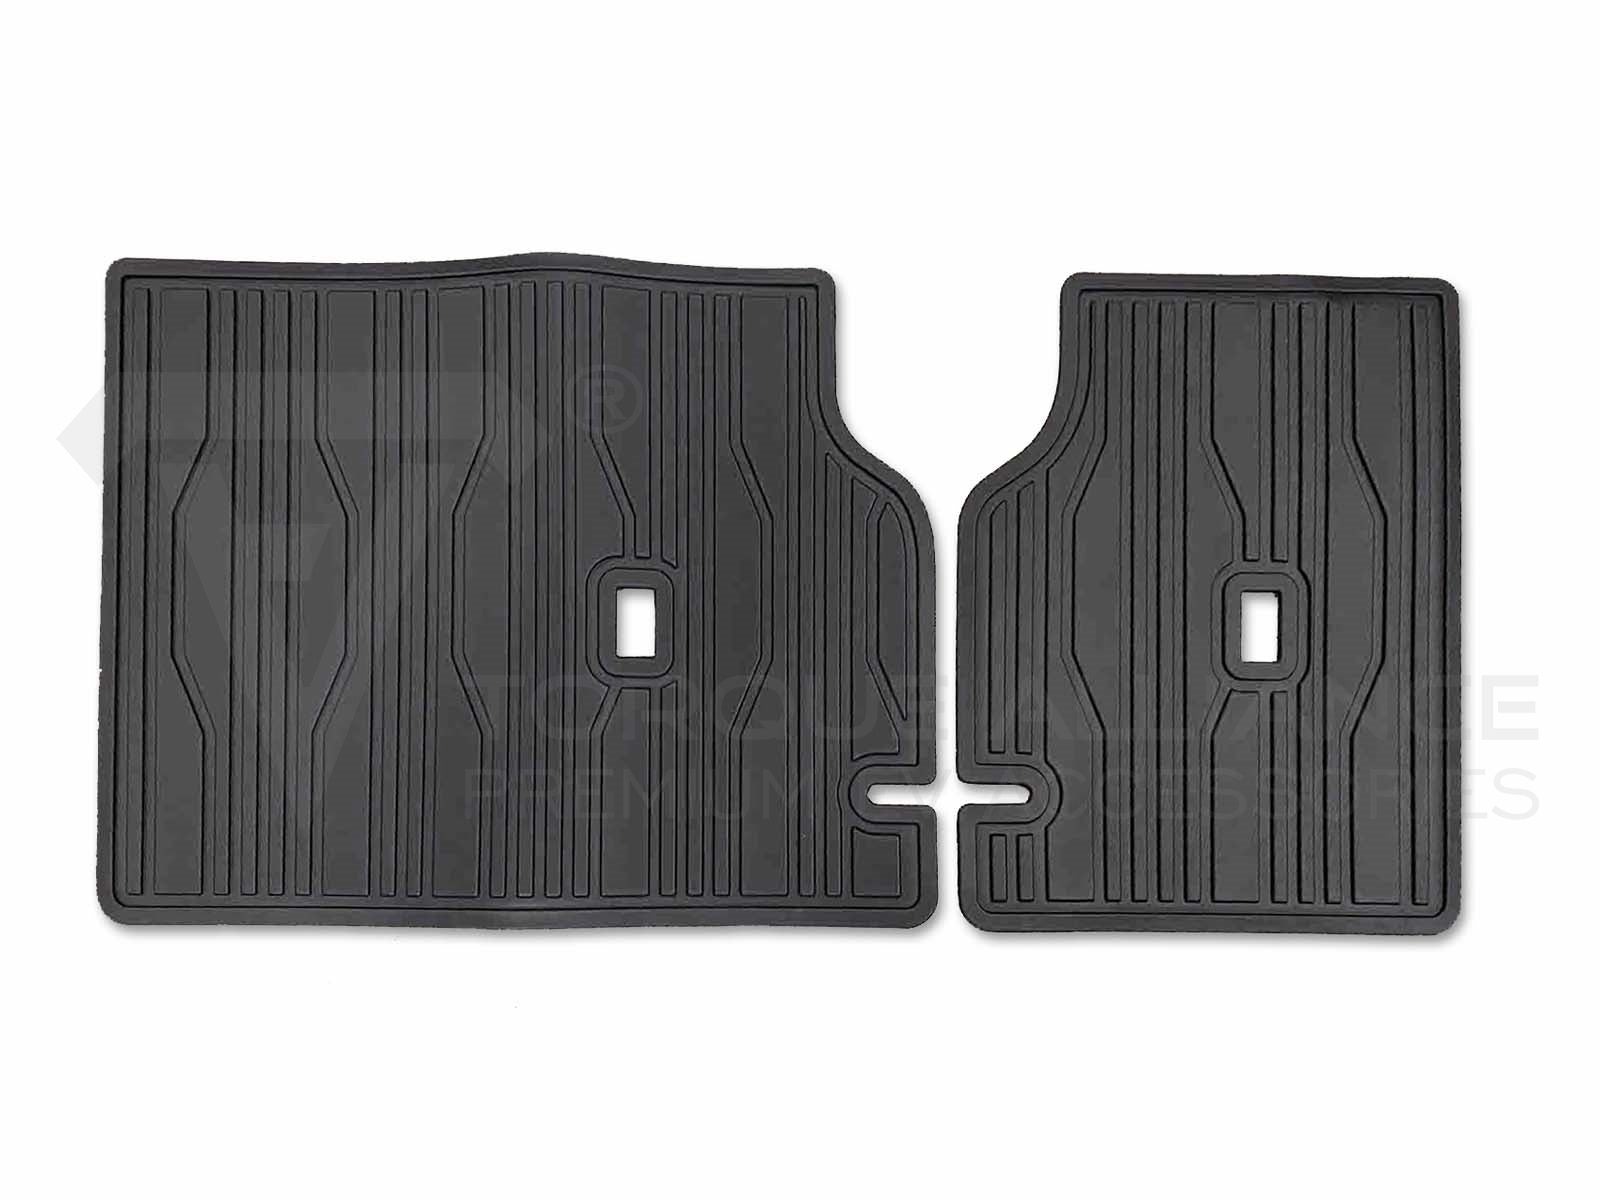 Ford Mustang Mach-e: Seat Back Protector Mats, Guard Boot Liner (Premium Recyclable Rubber, 2 pcs) - Torque Alliance